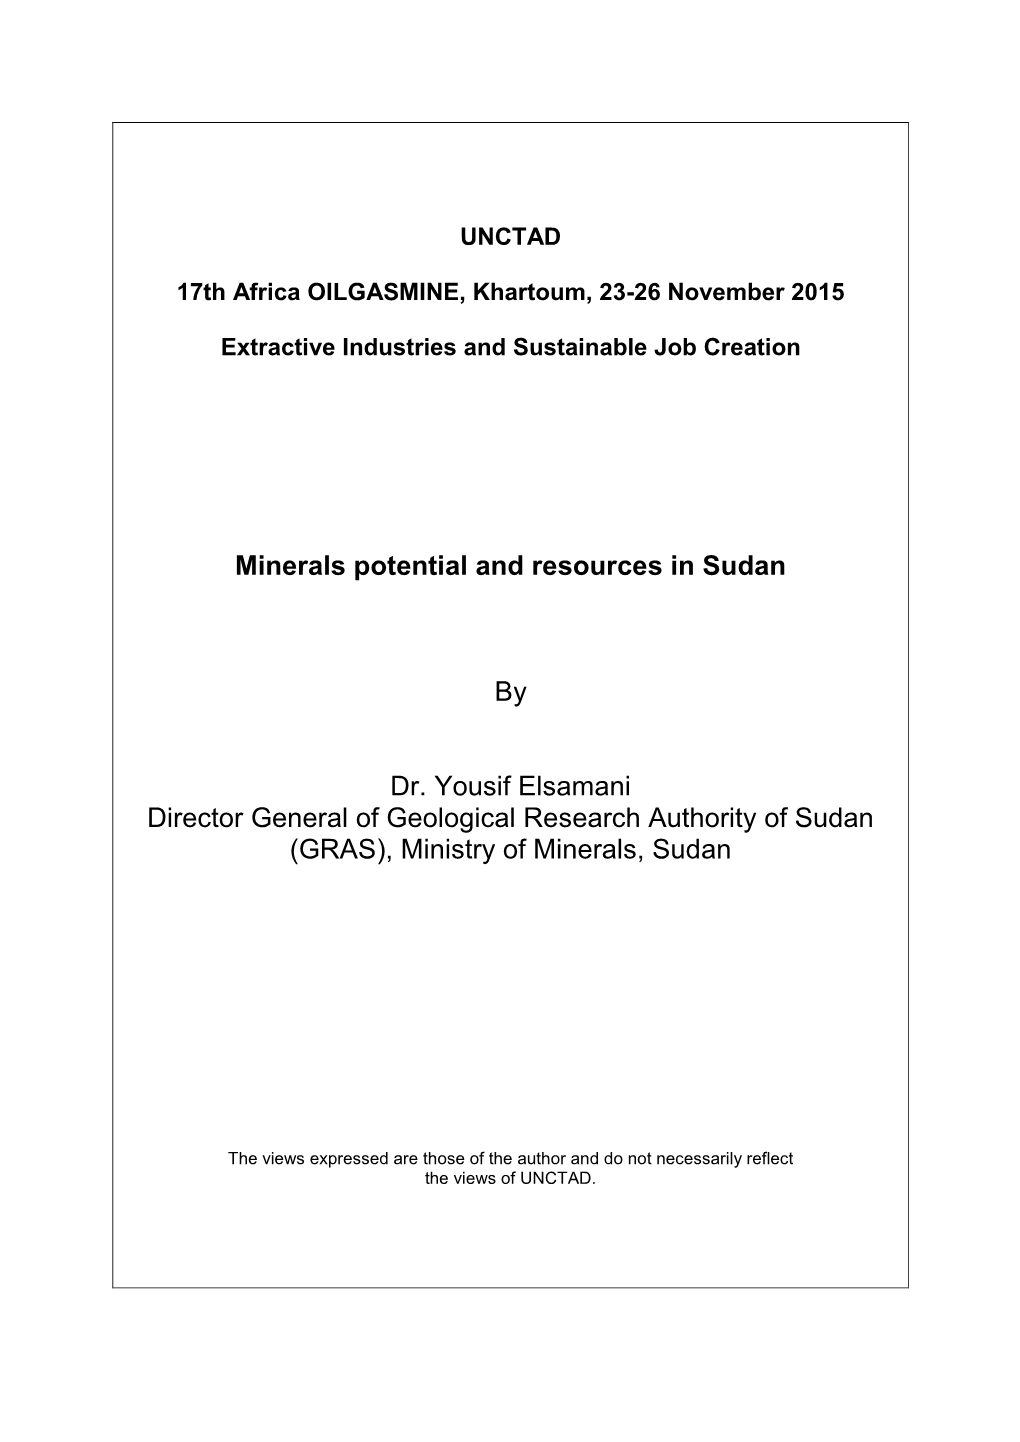 Minerals Potential and Resources in Sudan